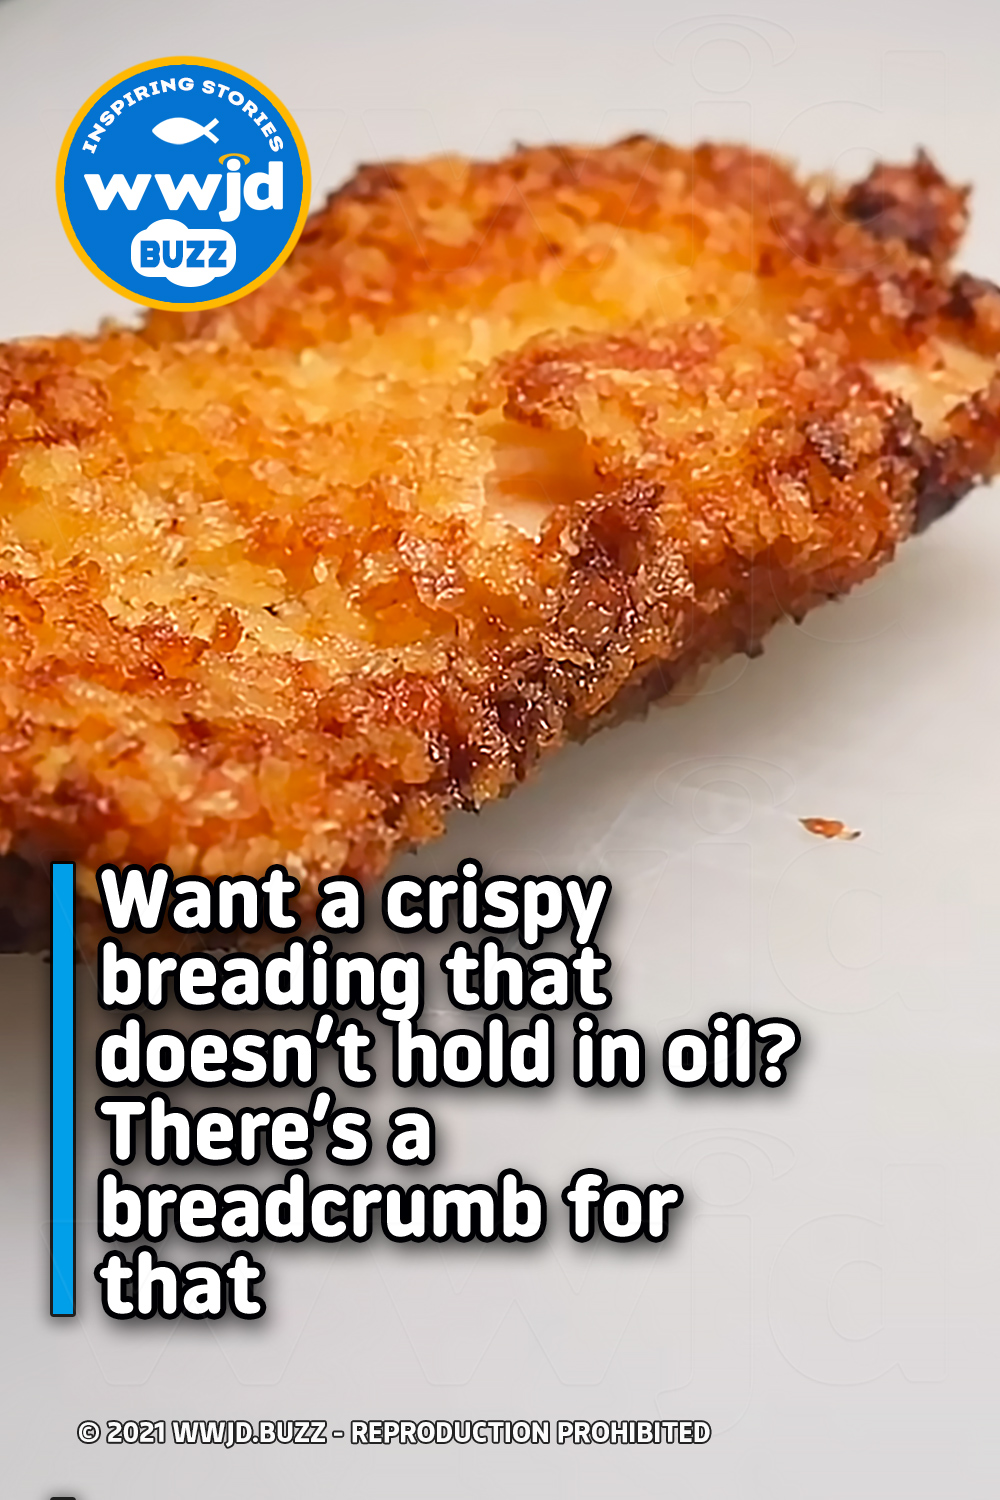 Want a crispy breading that doesn’t hold in oil? There’s a breadcrumb for that